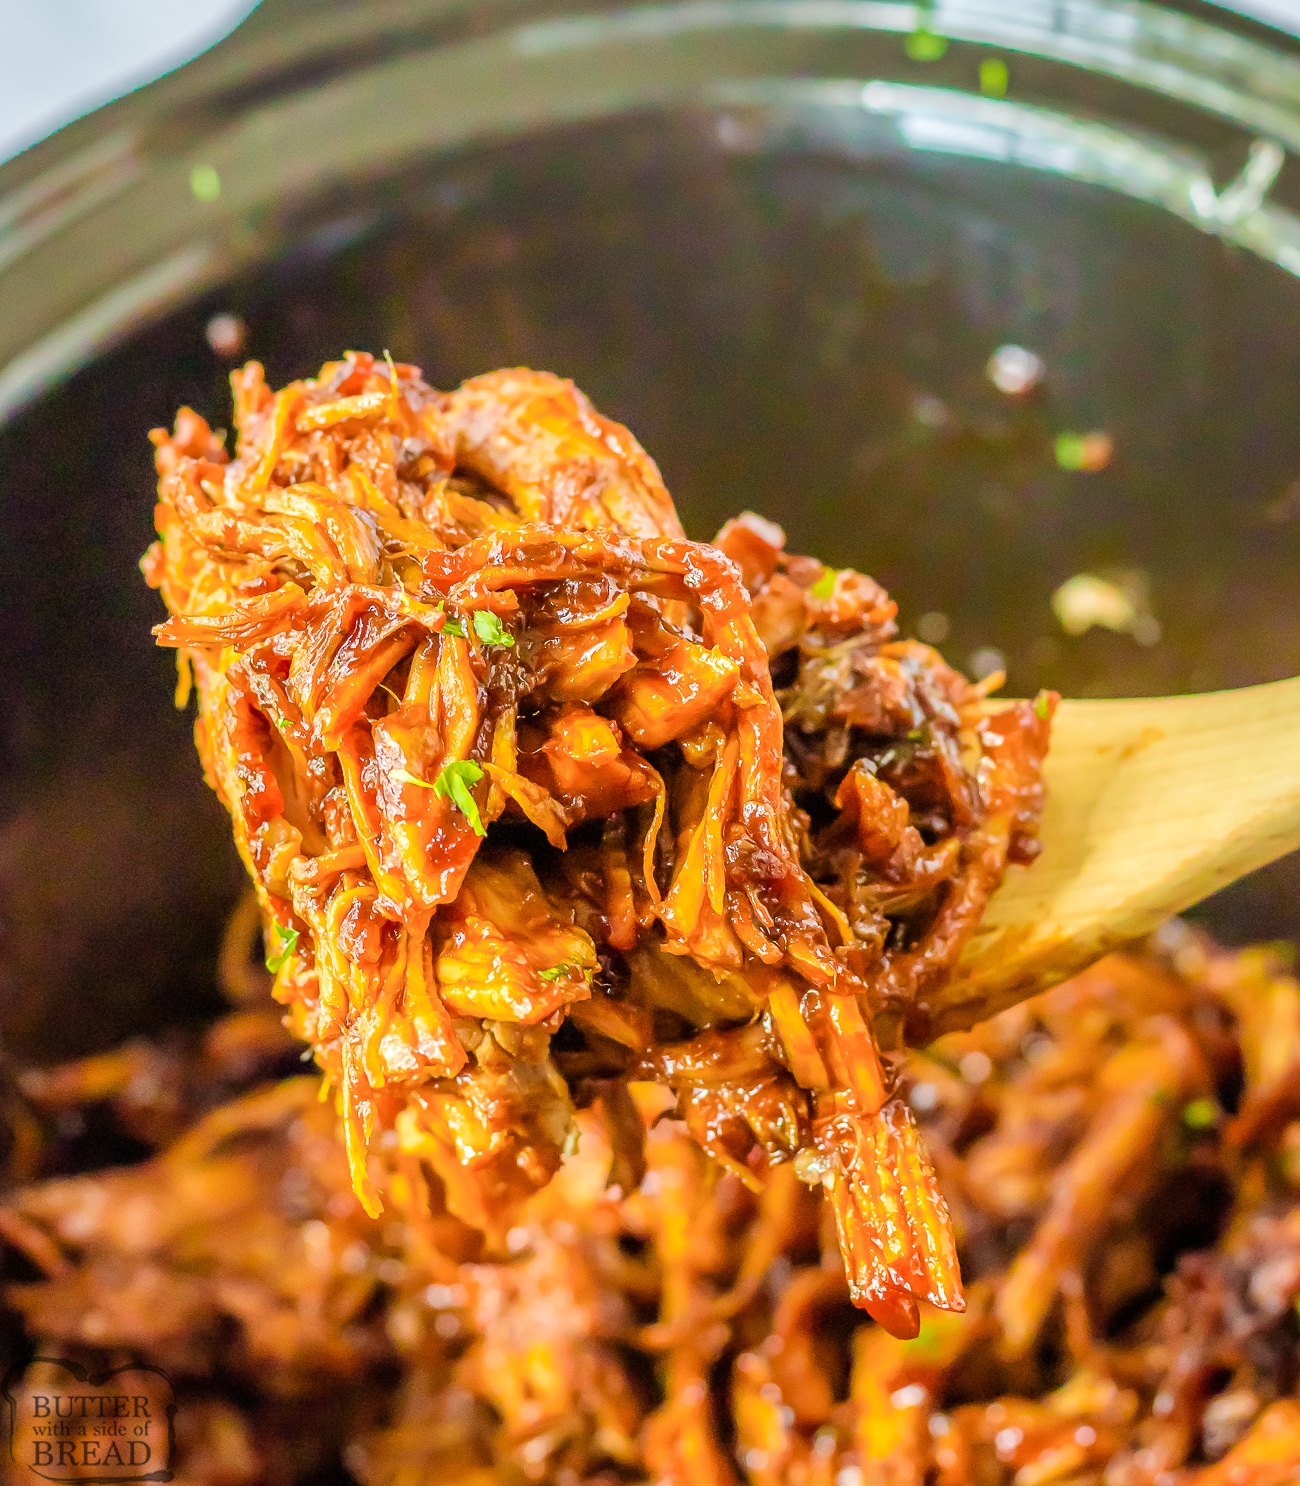 scoop of shredded pork loin made in a slow cooker